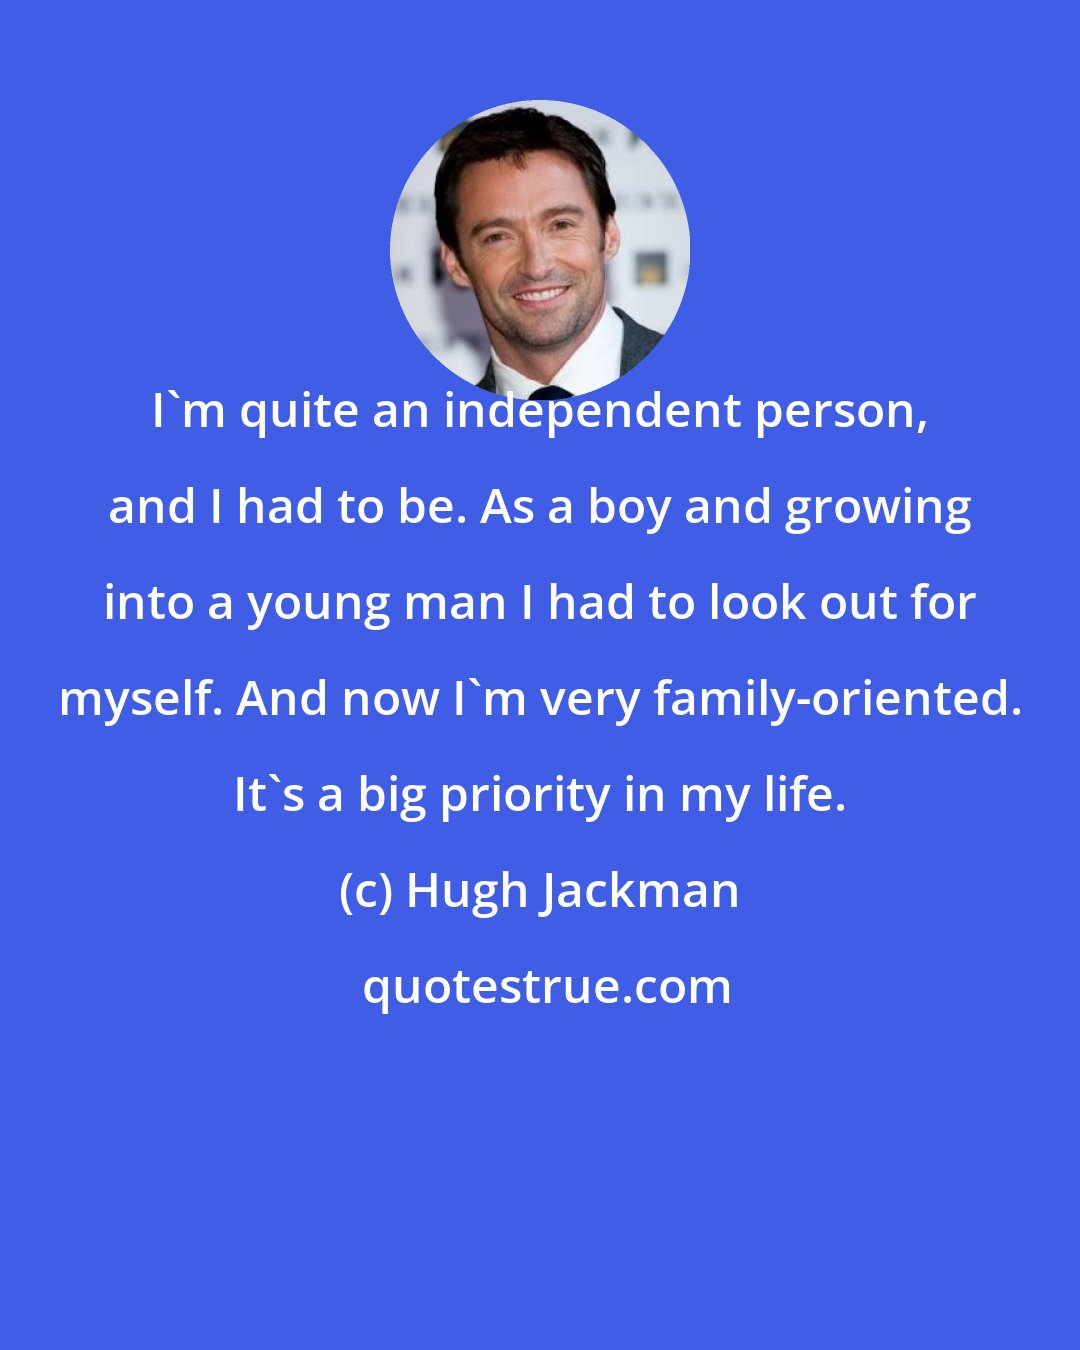 Hugh Jackman: I'm quite an independent person, and I had to be. As a boy and growing into a young man I had to look out for myself. And now I'm very family-oriented. It's a big priority in my life.